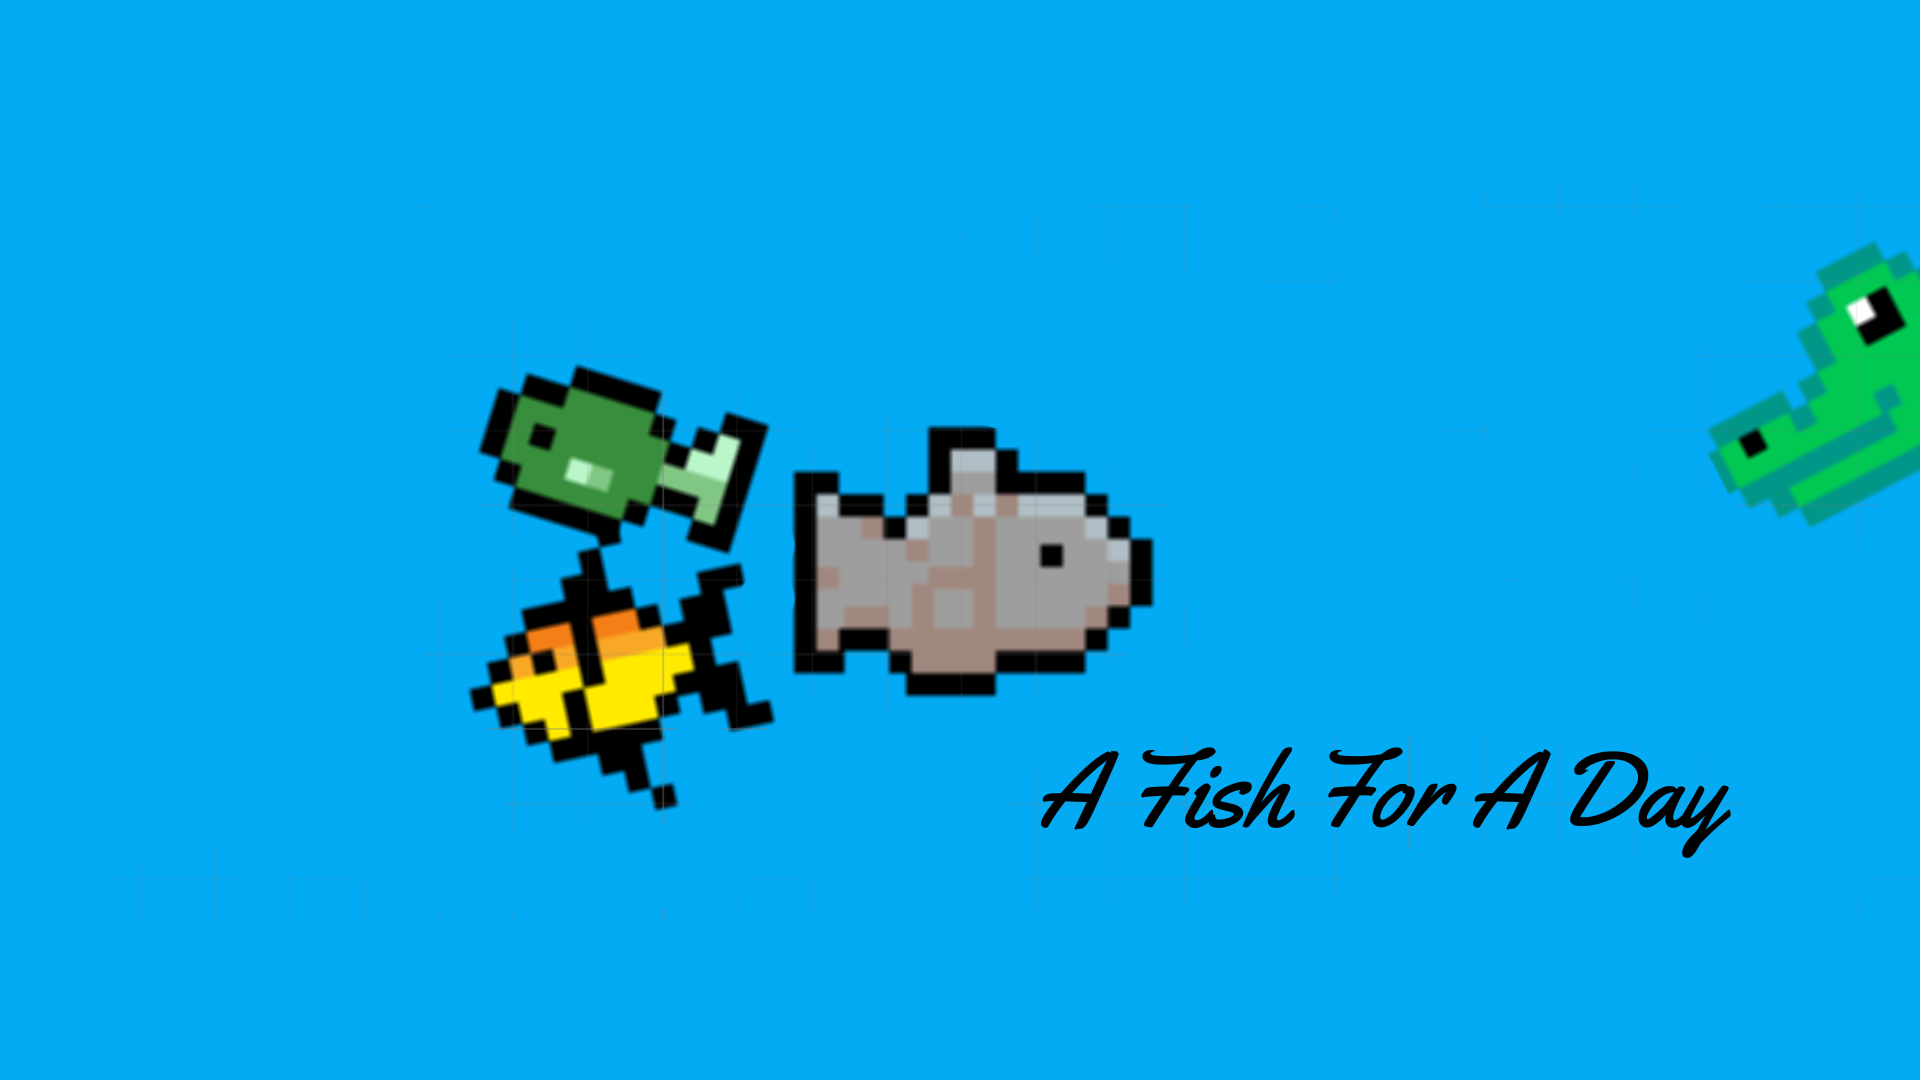 Fish For A Day